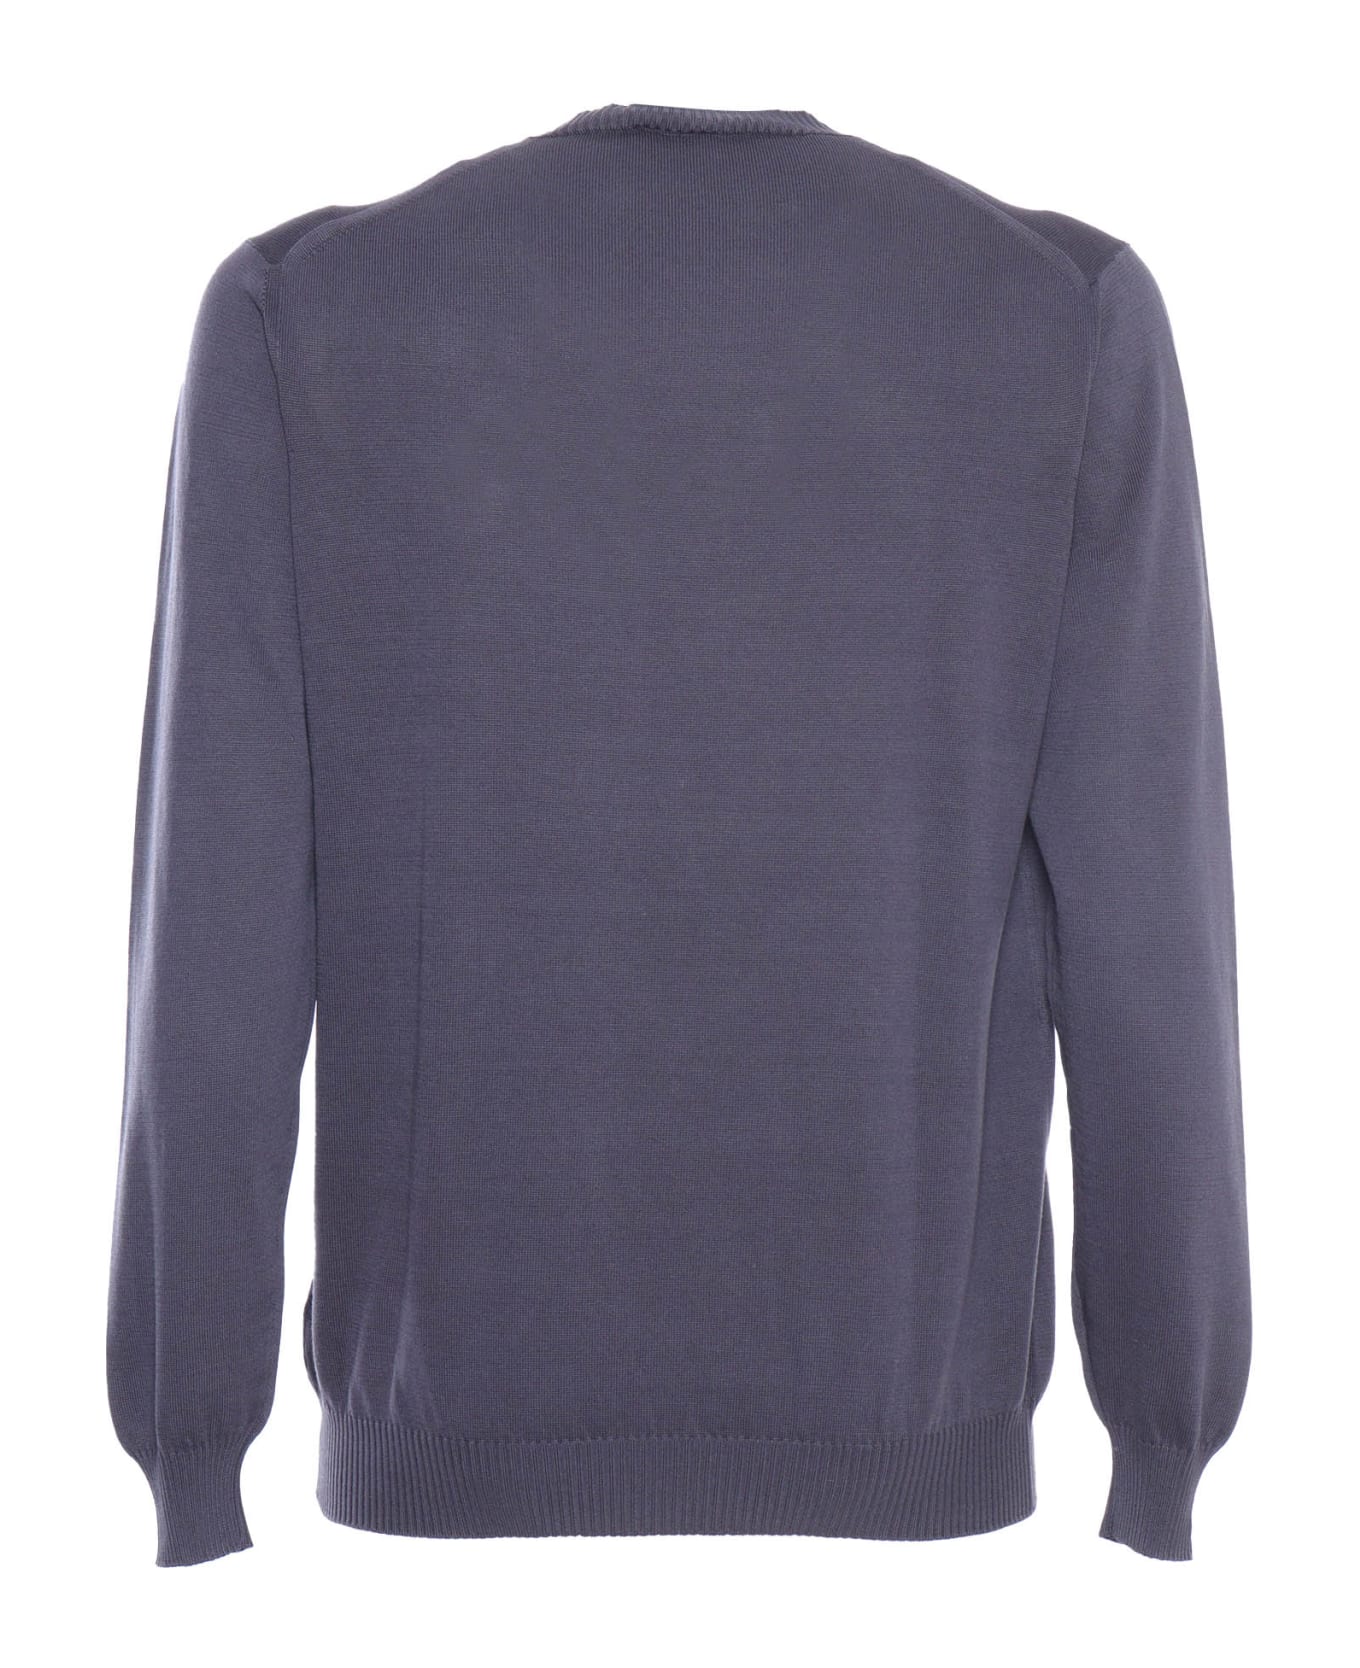 Fedeli Giza Light Frosted Sweater - BLUE